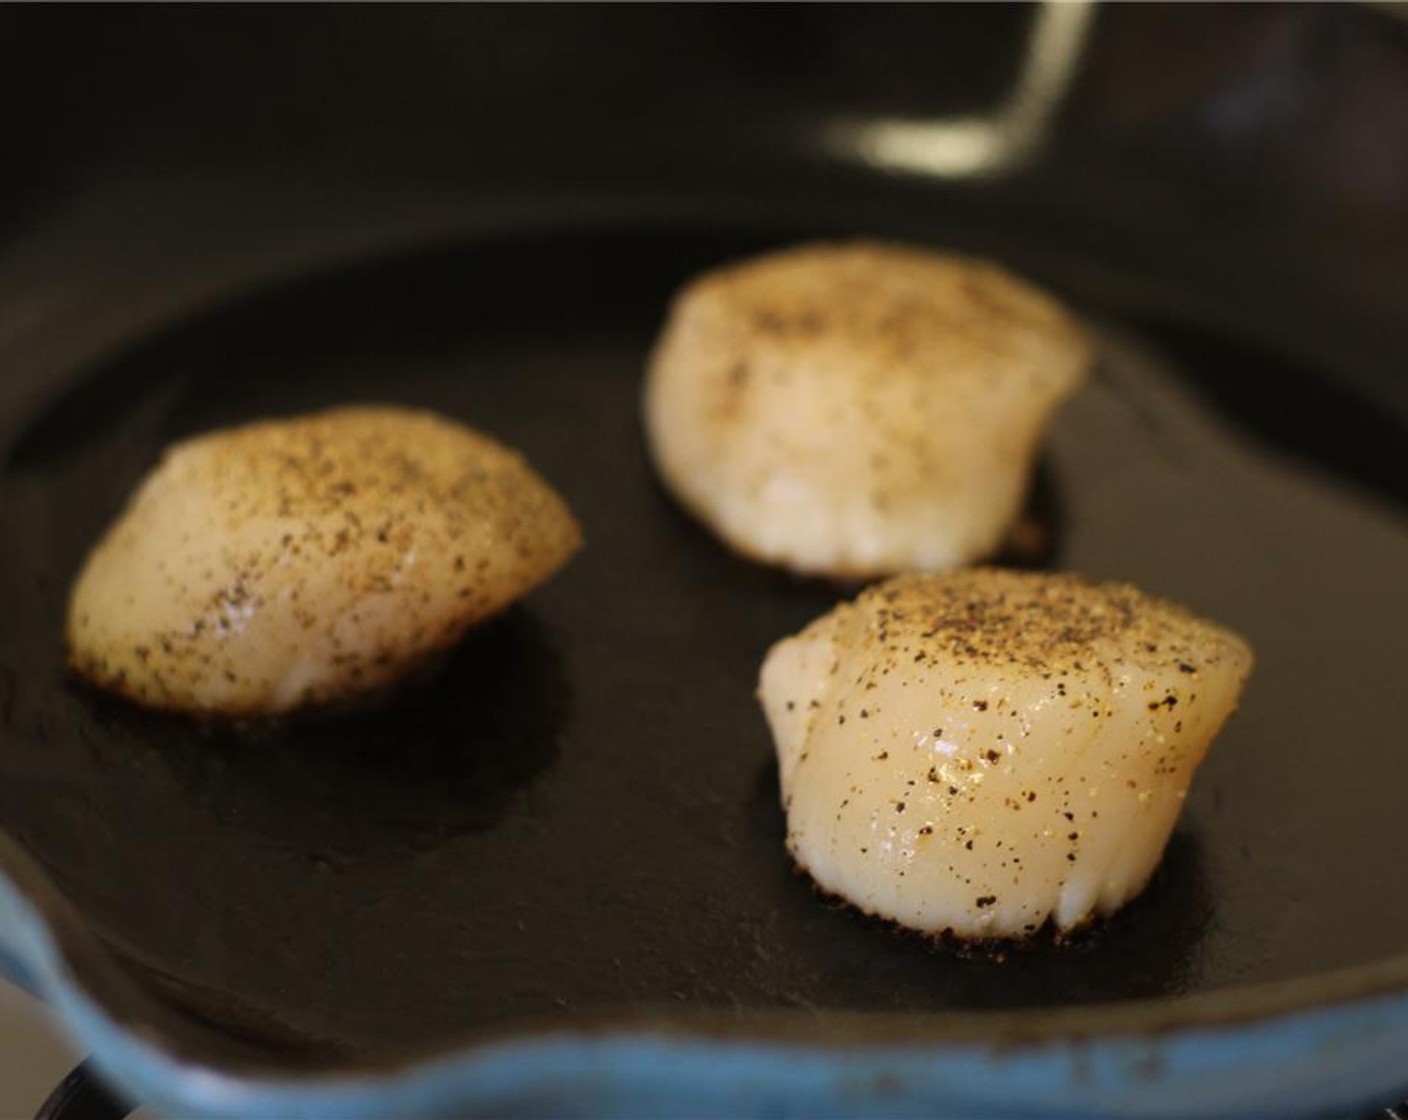 step 16 Cook the scallops for 1-2 minutes per side. Don’t disturb them as they cook! This will ensure they develop a nice crust on each side